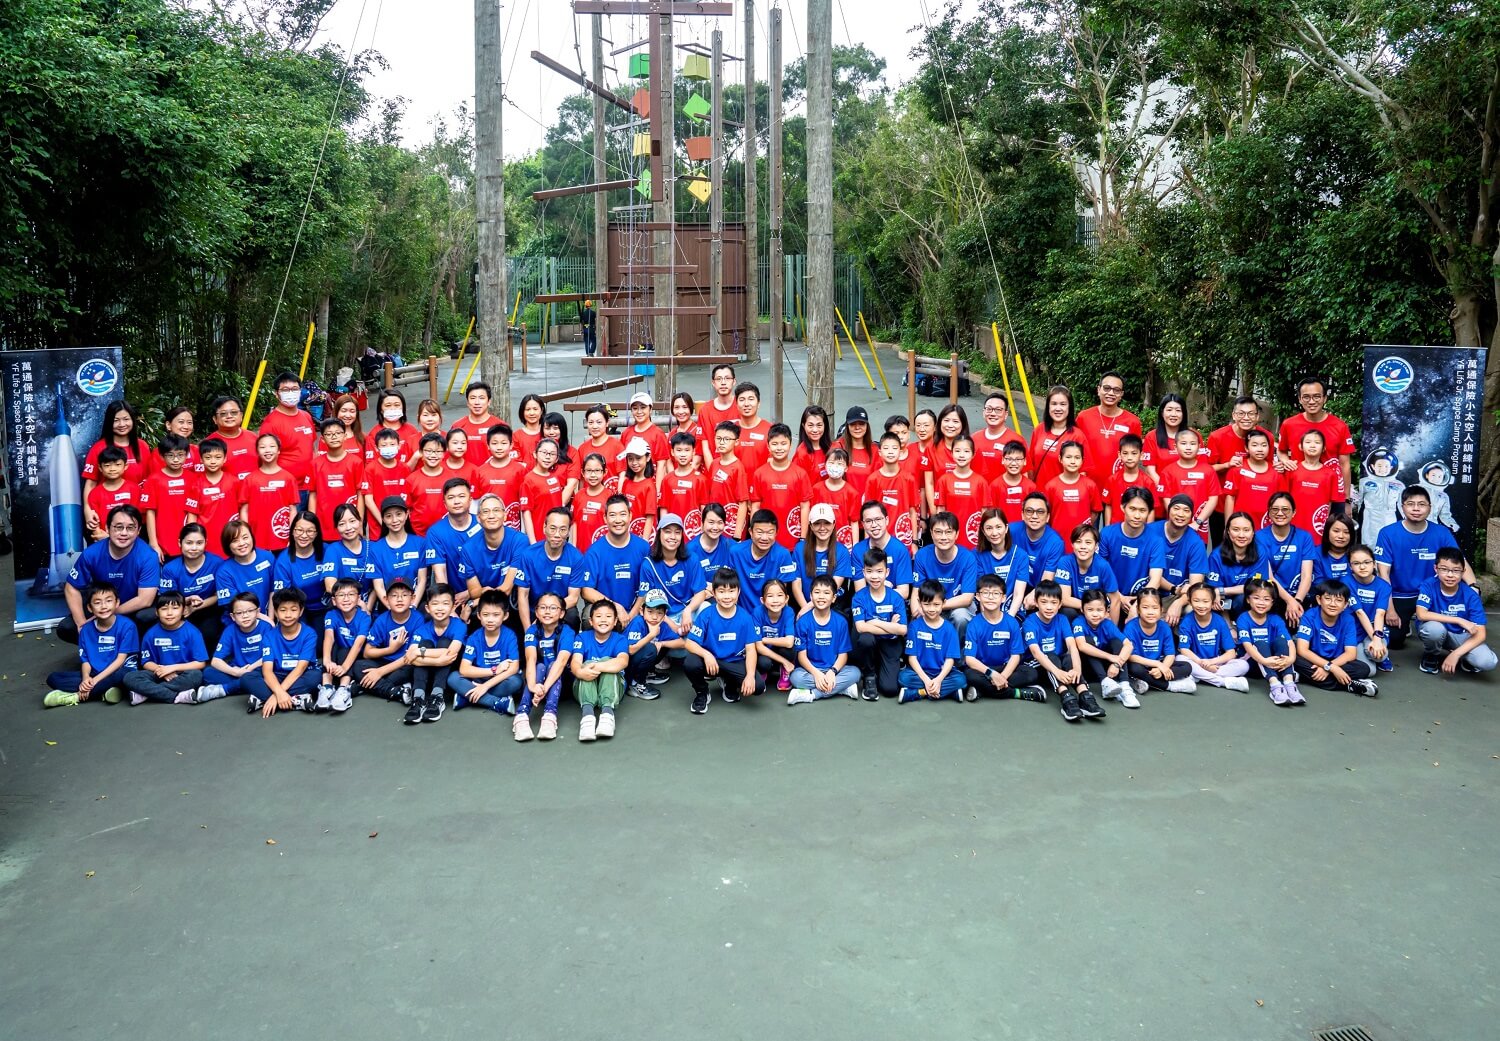 The 50 shortlisted candidates attended a day of adventure-based physical training held at Noah’s Ark Hong Kong.